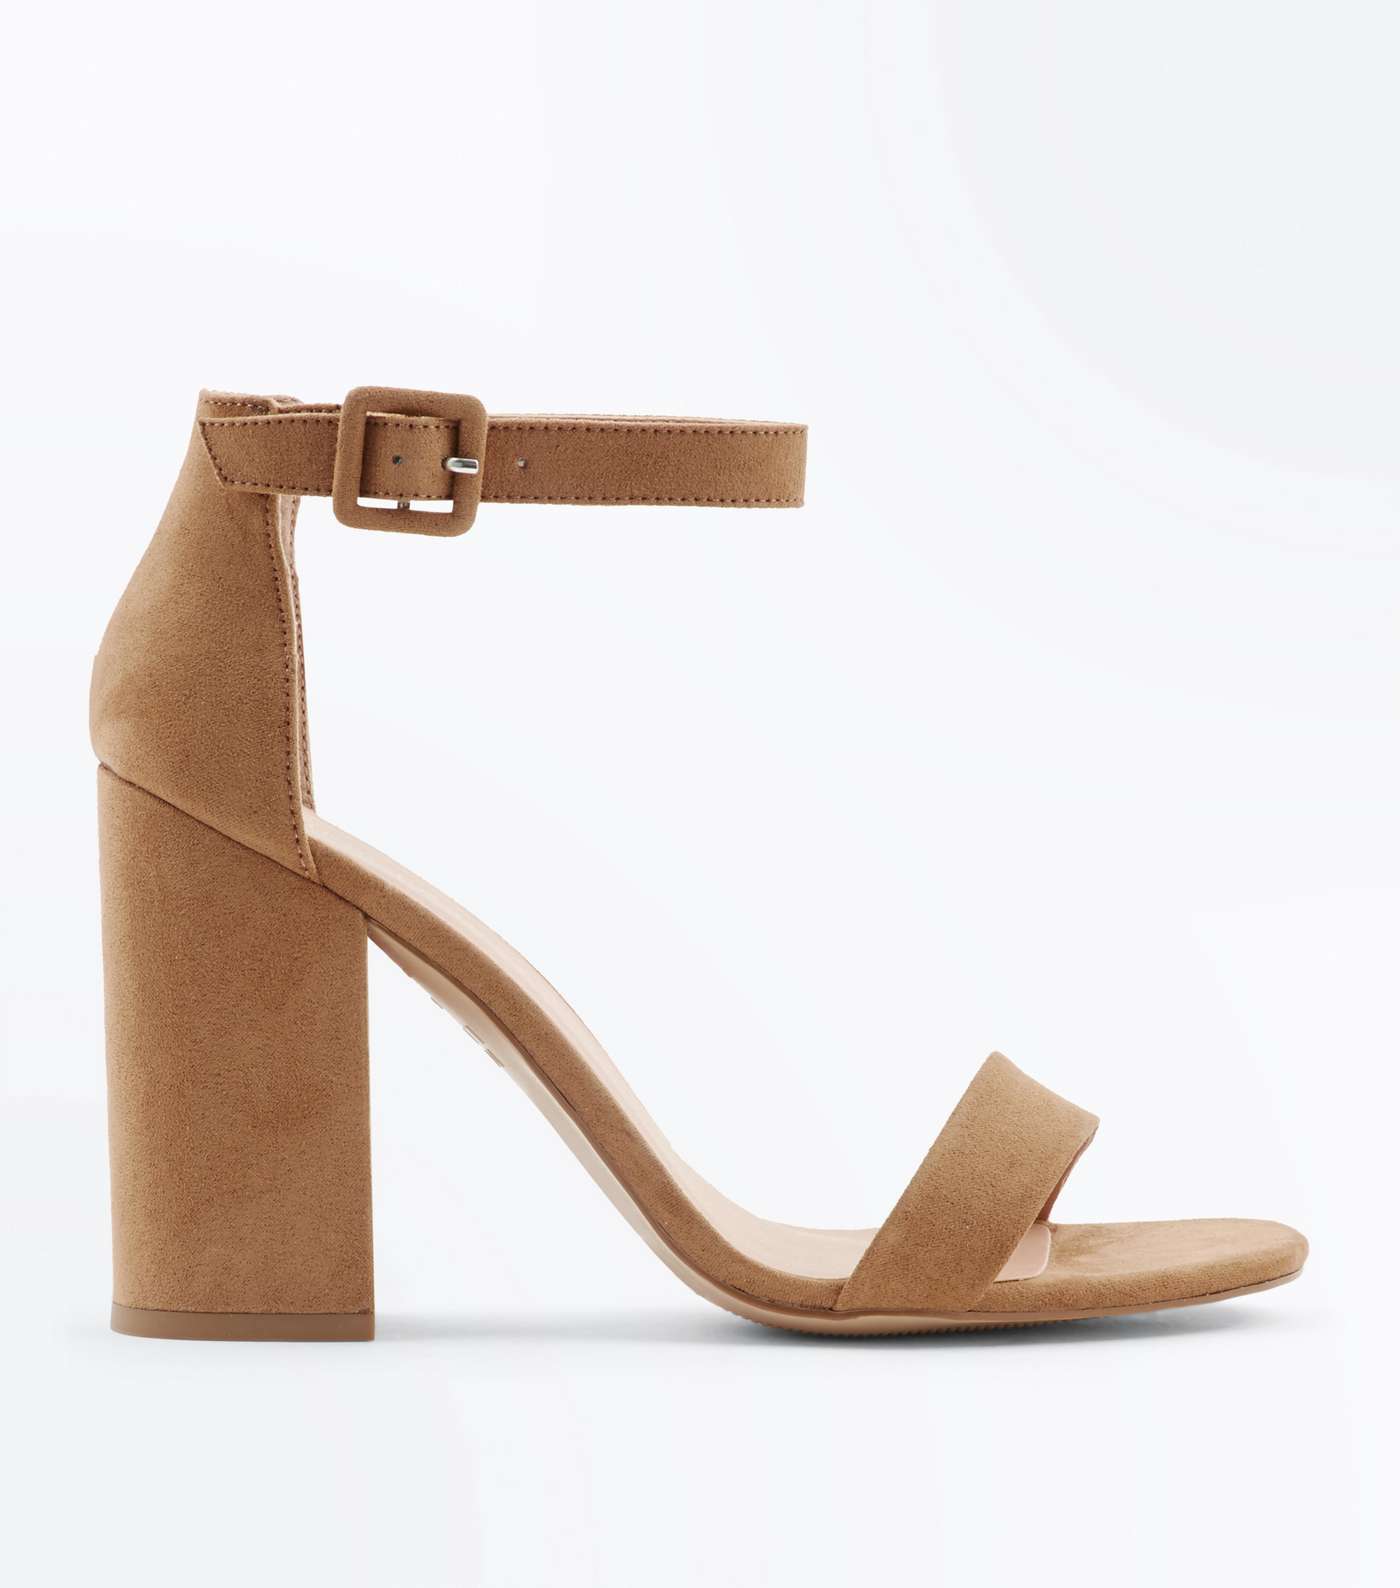 Mink Suedette Barely There Block Heels